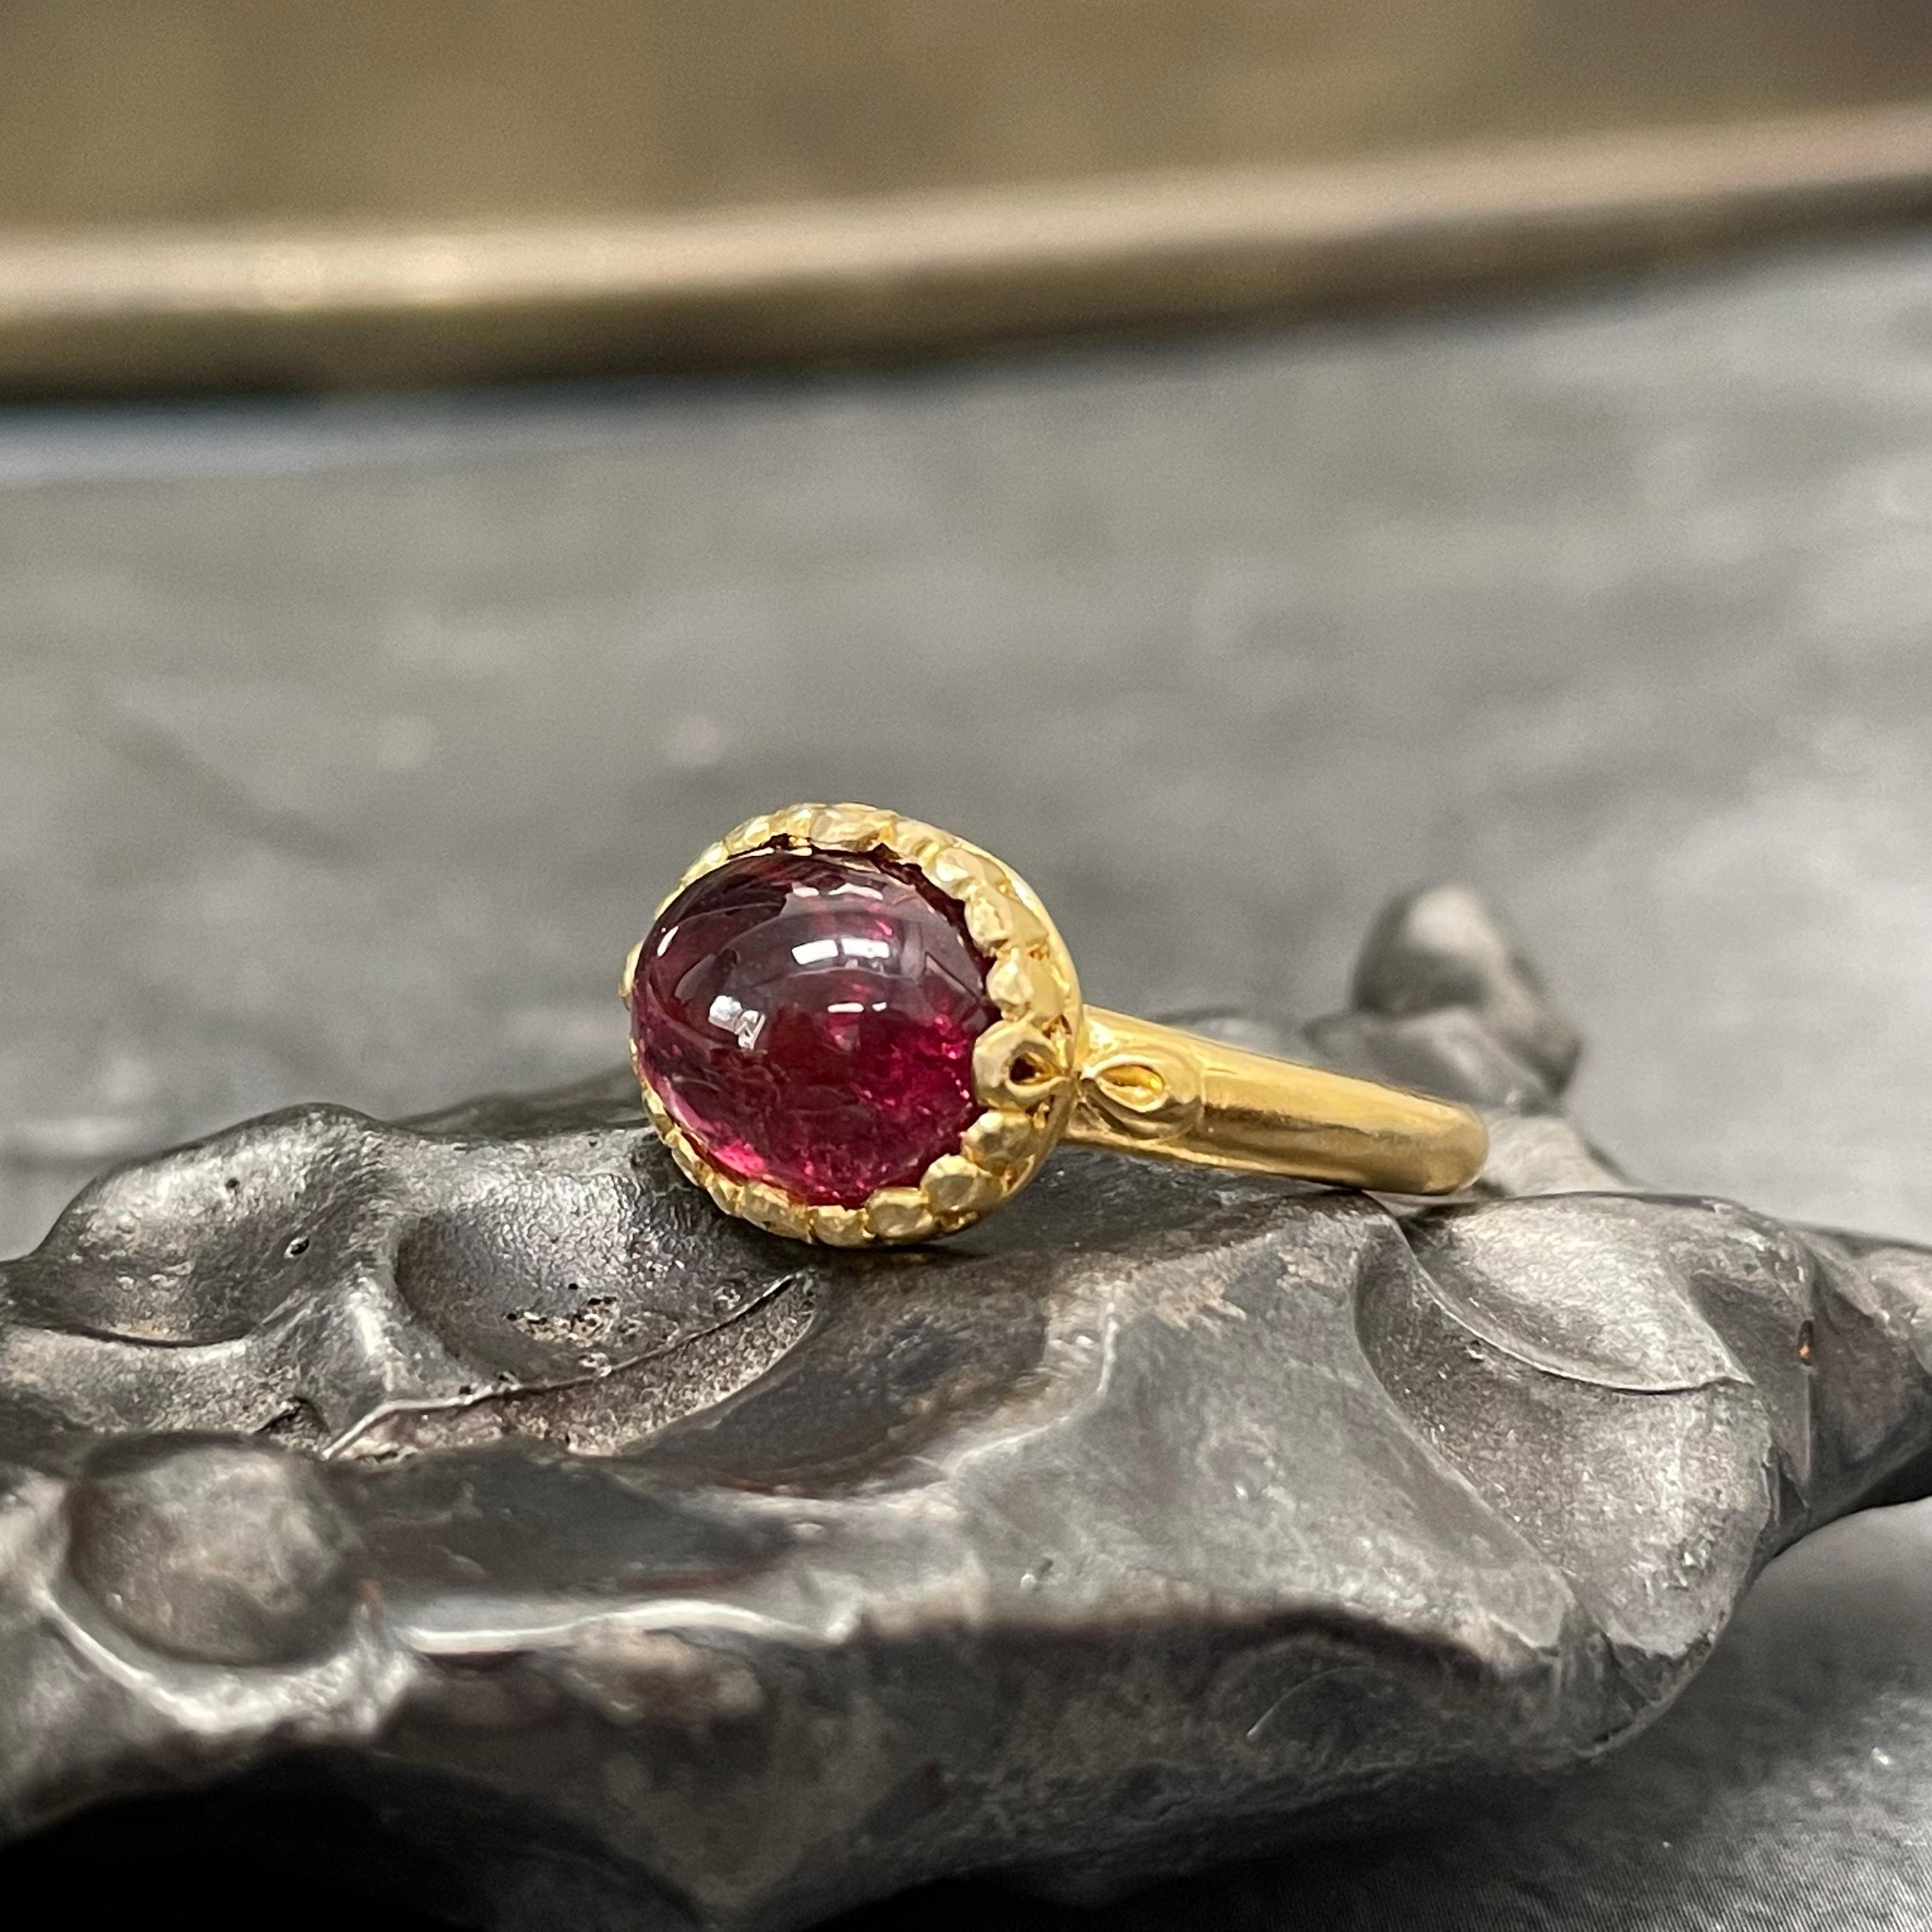 A nice luminous and lively 8x 10 mm oval pink tourmaline is set horizontally within a fluted bezel setting atop a slightly tapered 18K shank, all in matte finish.  A sweet and delicate ring for someone. Sometimes less is more!